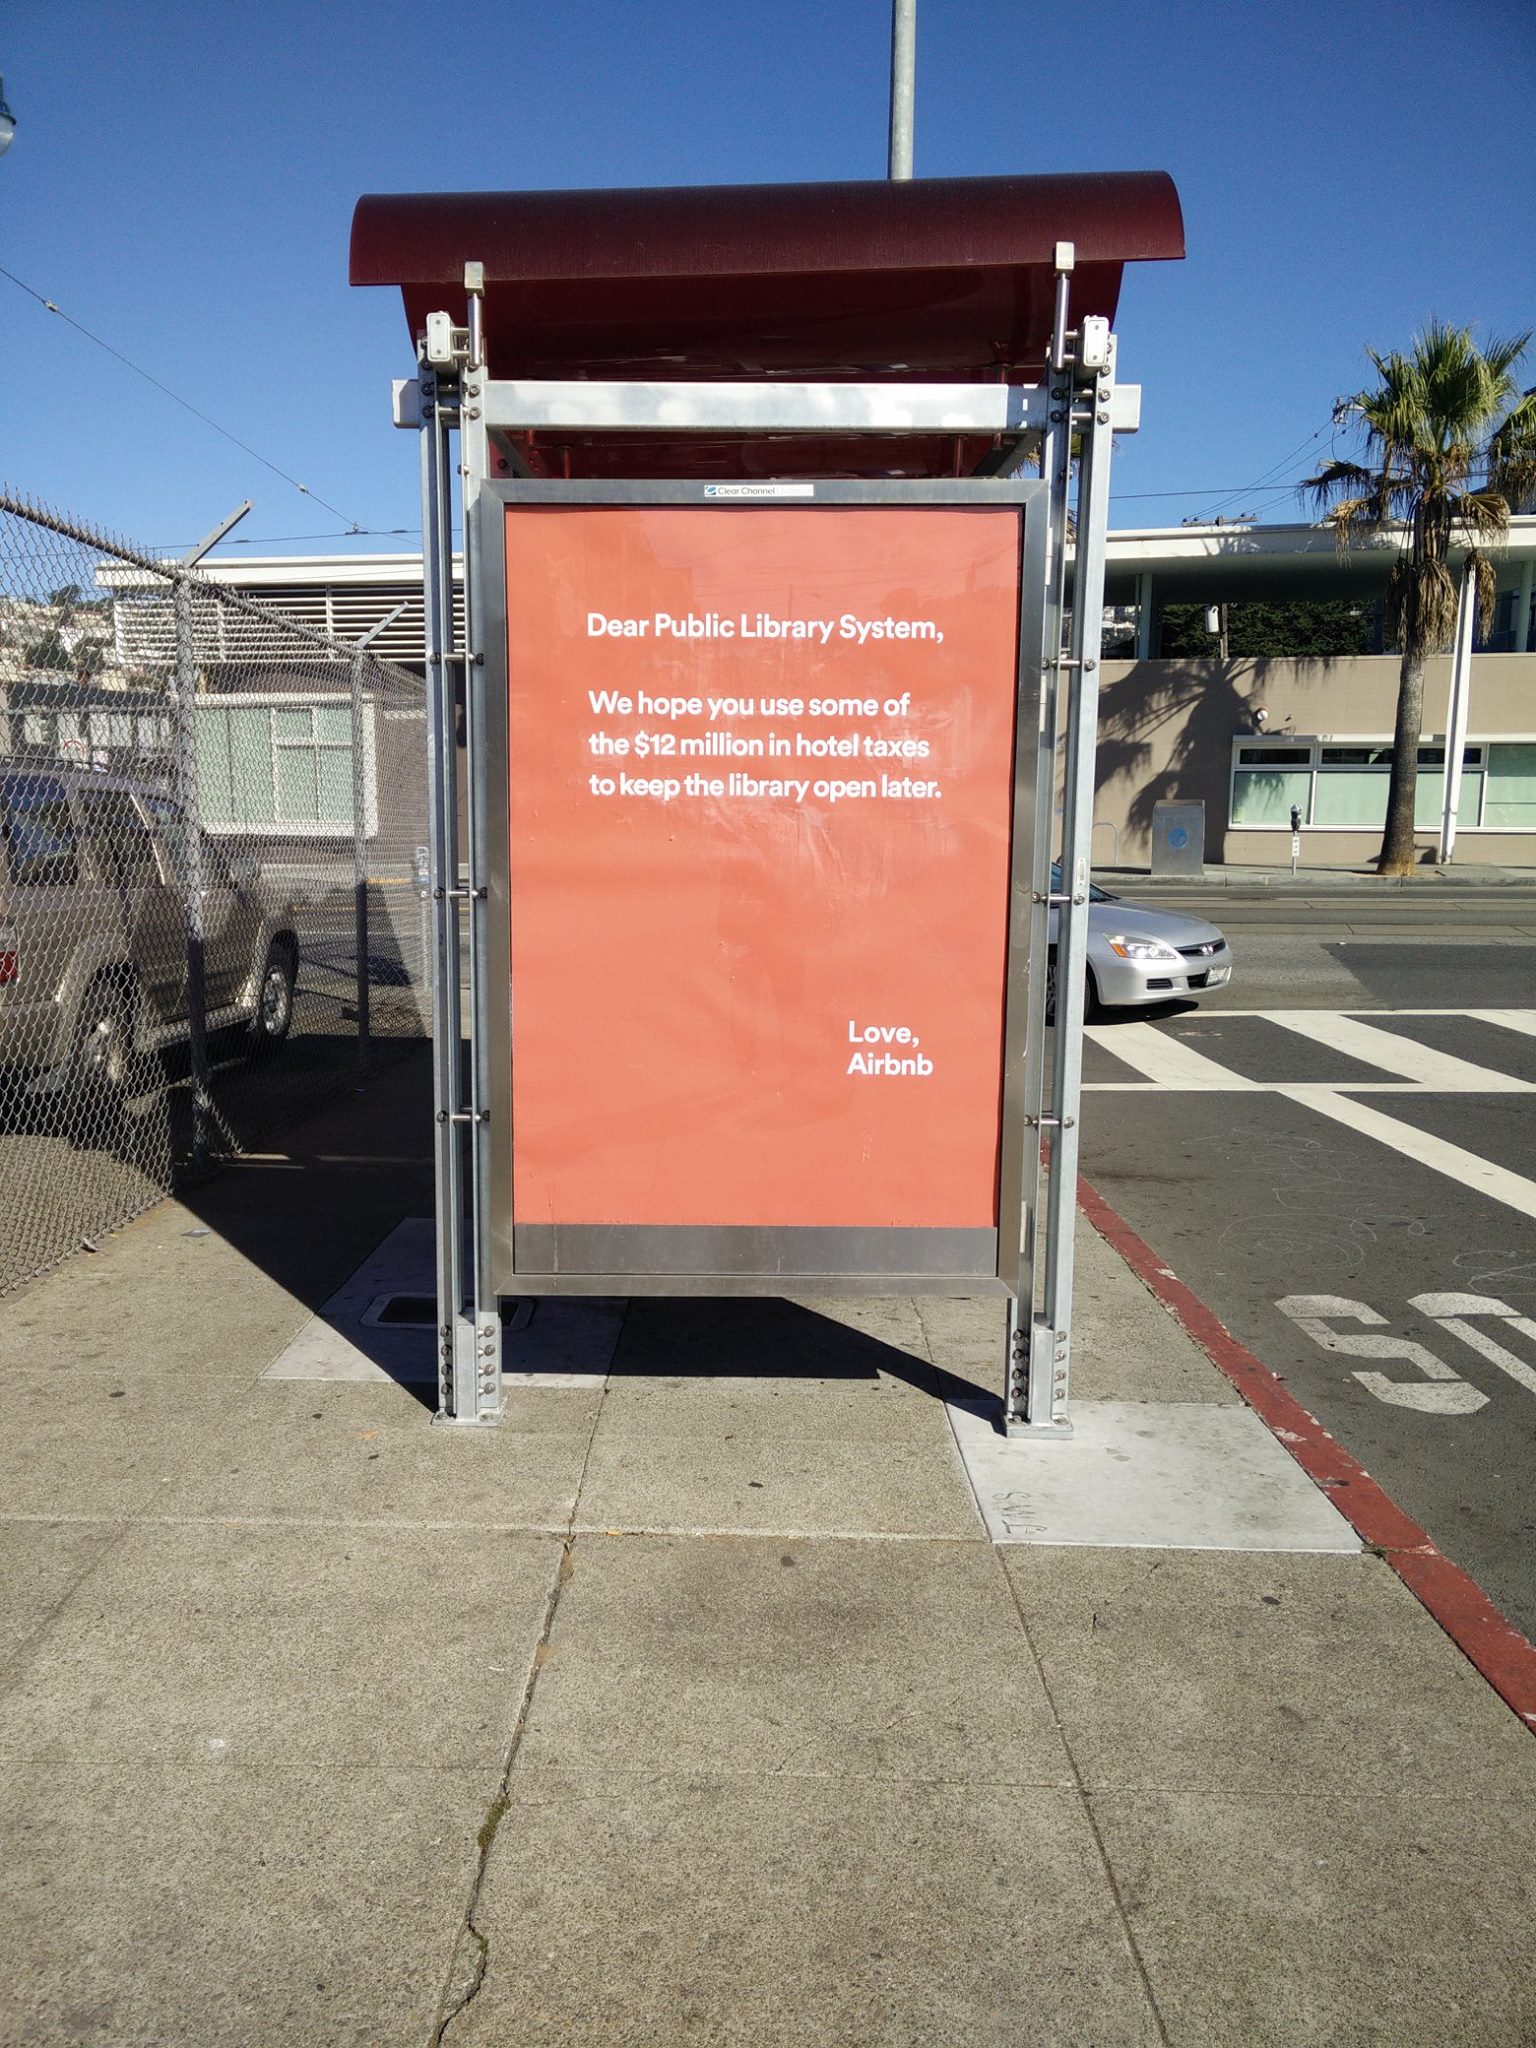 AirBNB Apologizes To Own Employees For Passive-Aggressive Ads